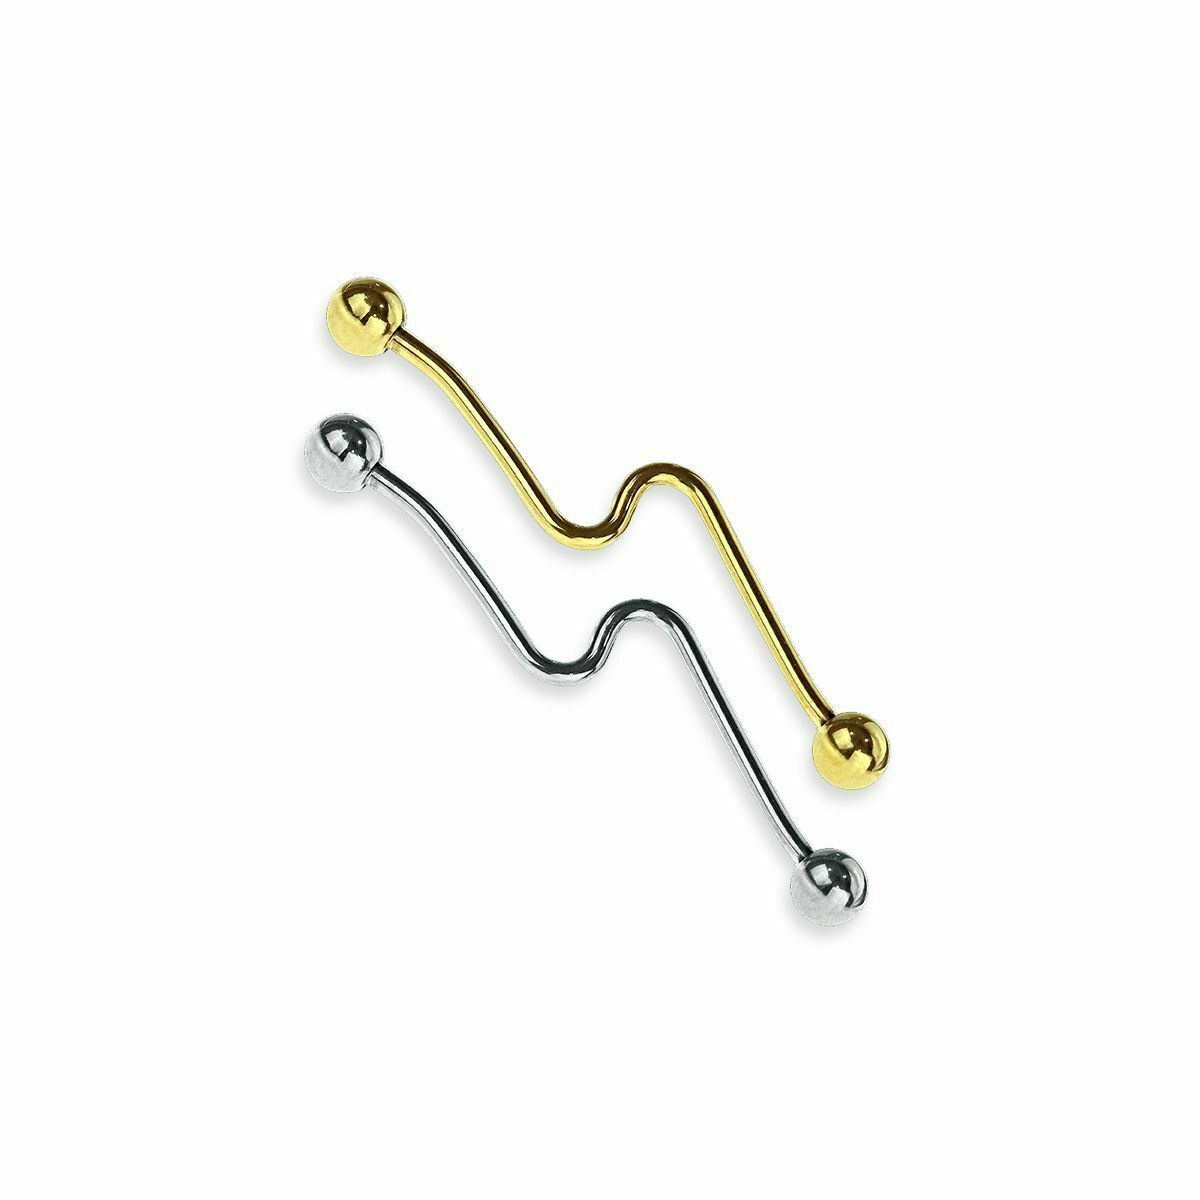 Industrial Barbell Surgical Steel Waved for scaffold piercings - Sold Each